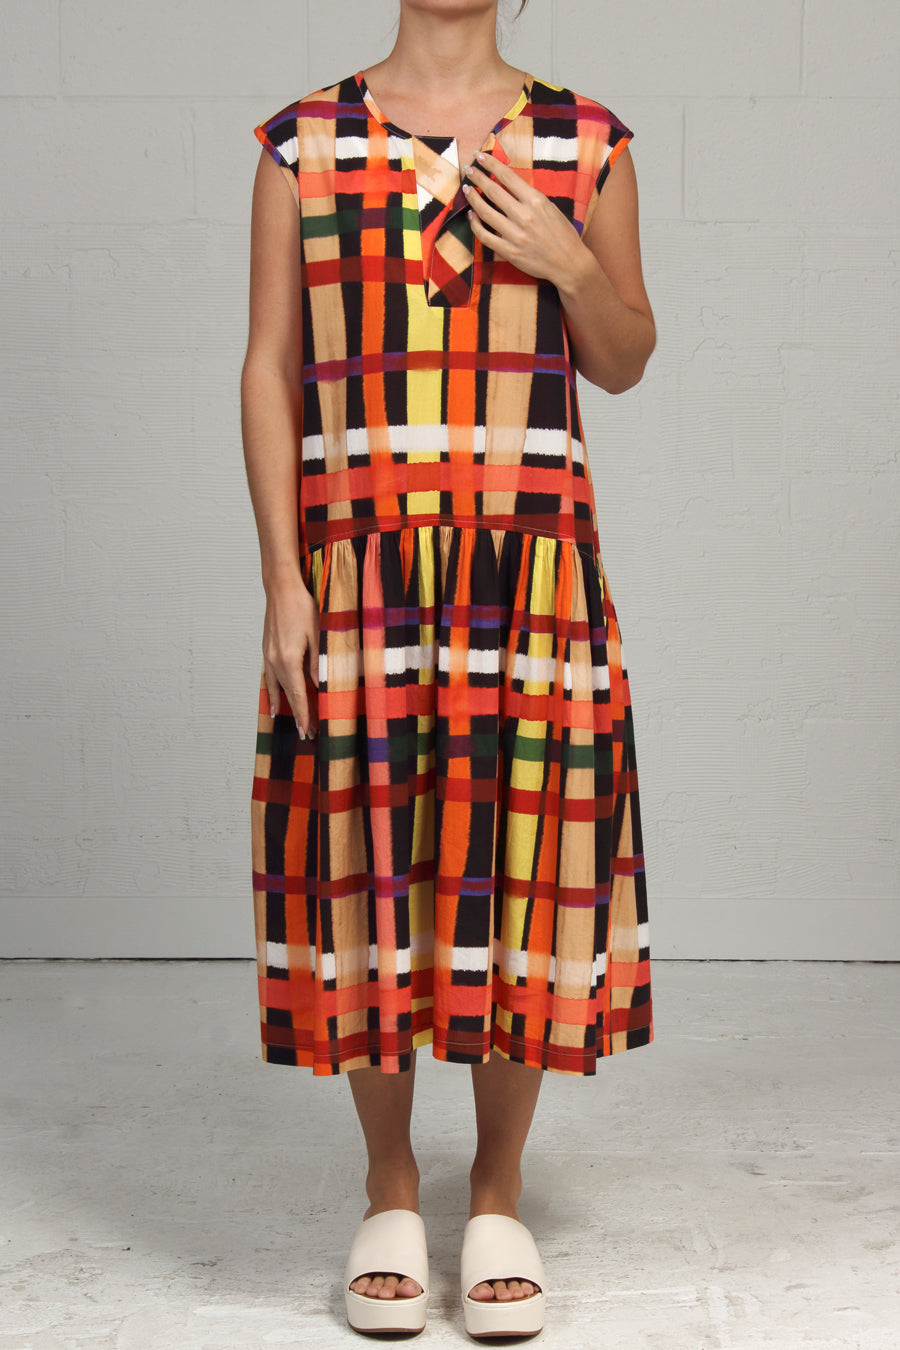 Painted Plaid Sewing Dress